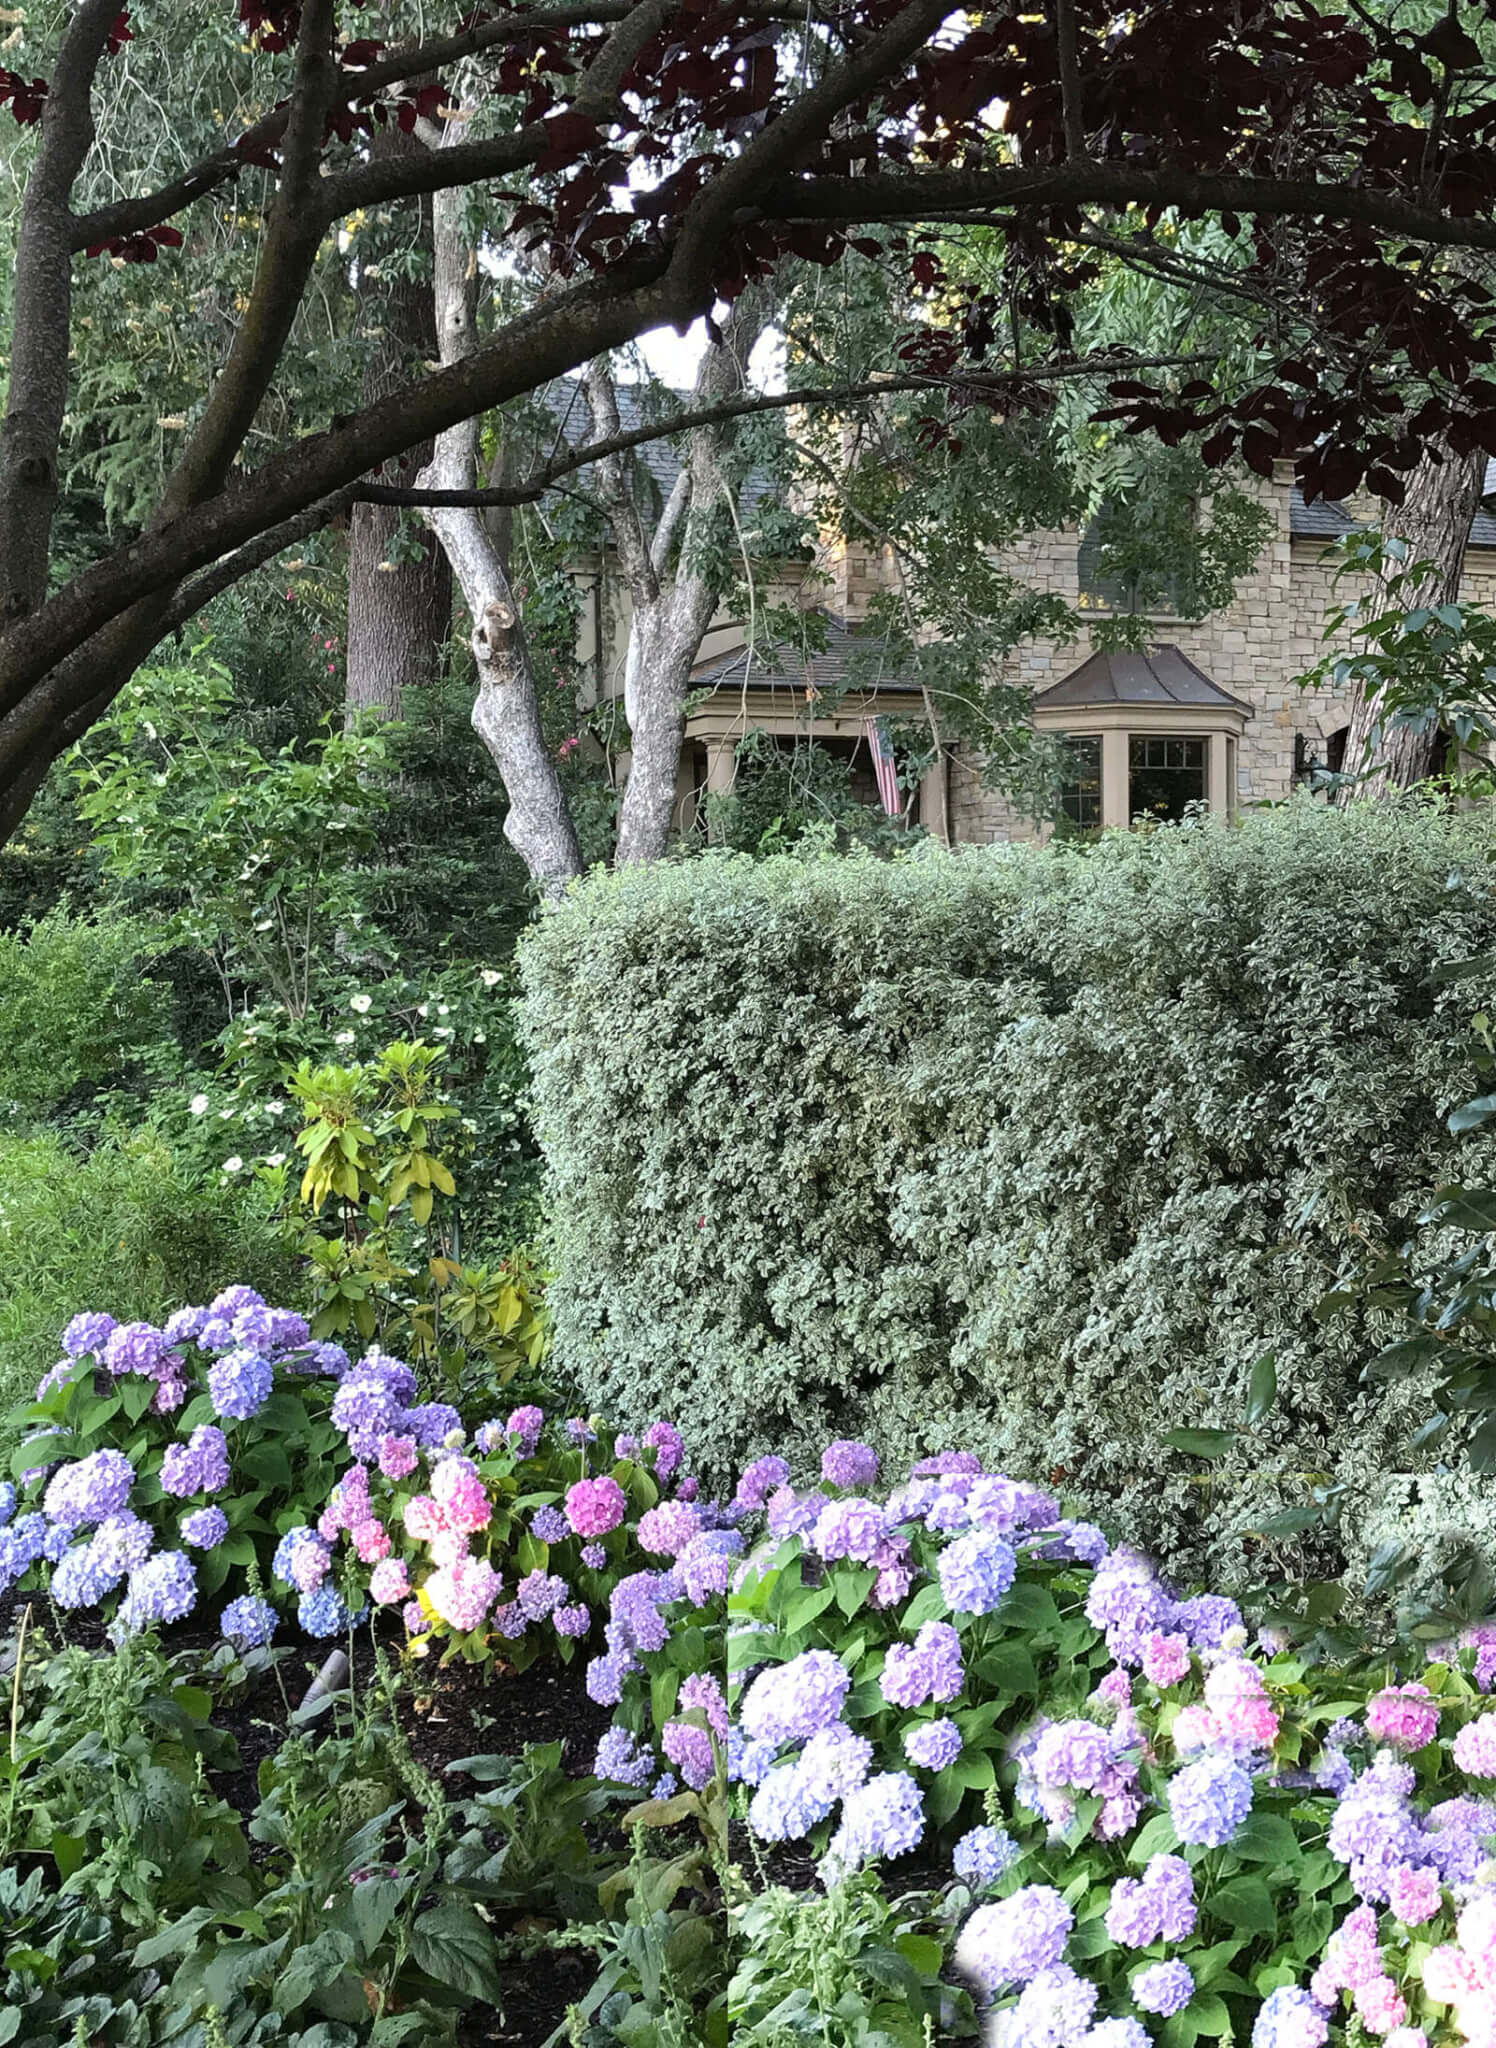 Tall screening hedge, accented with colorful hydrangeas under shaded tree canopy